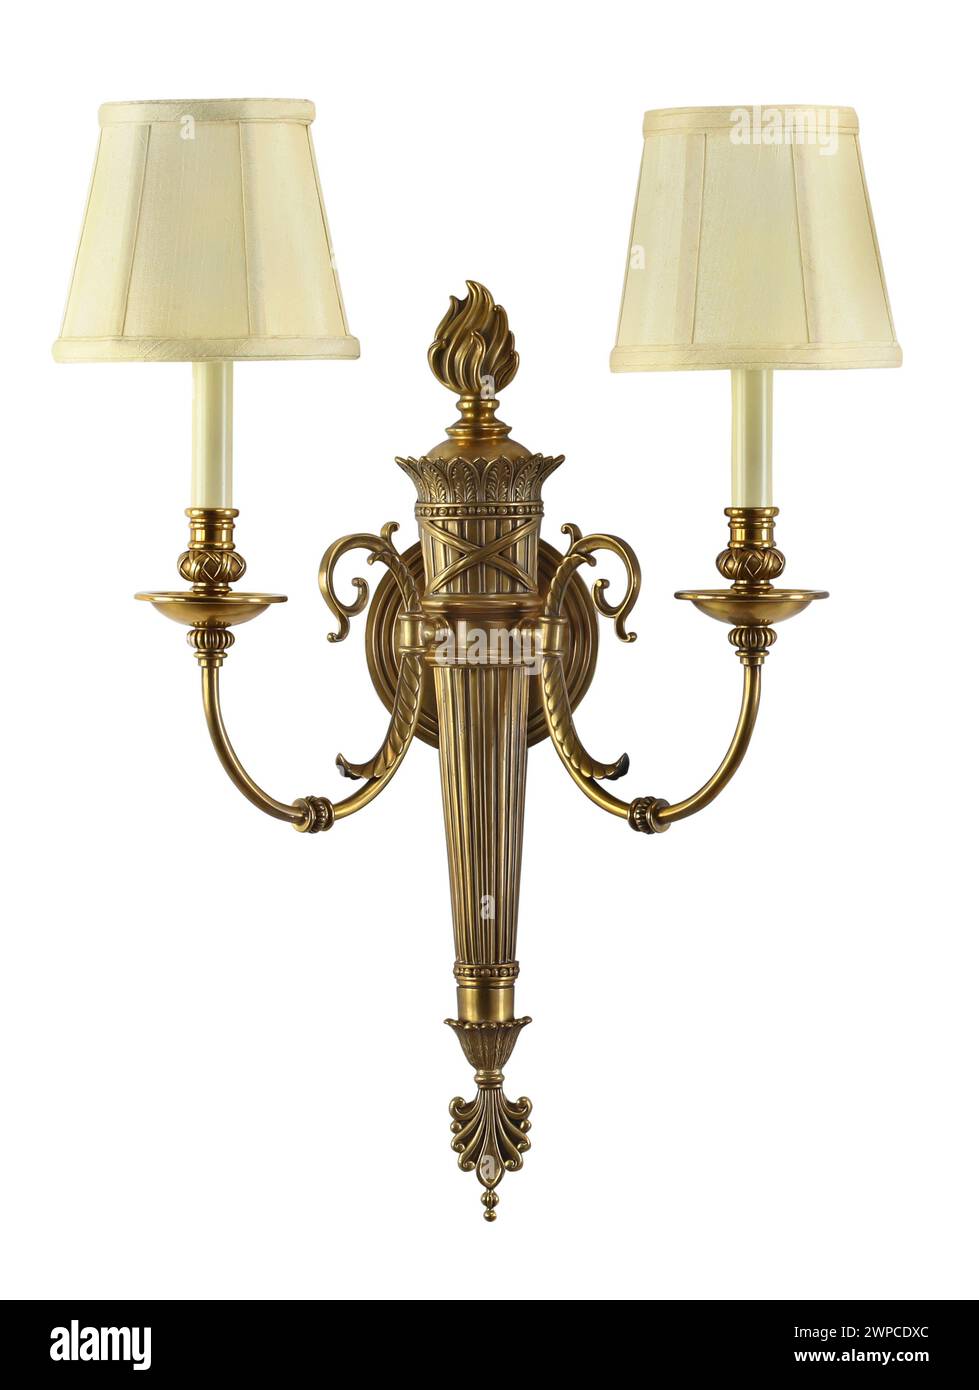 Wall sconce decorative two light fixture with clipping path. Stock Photo